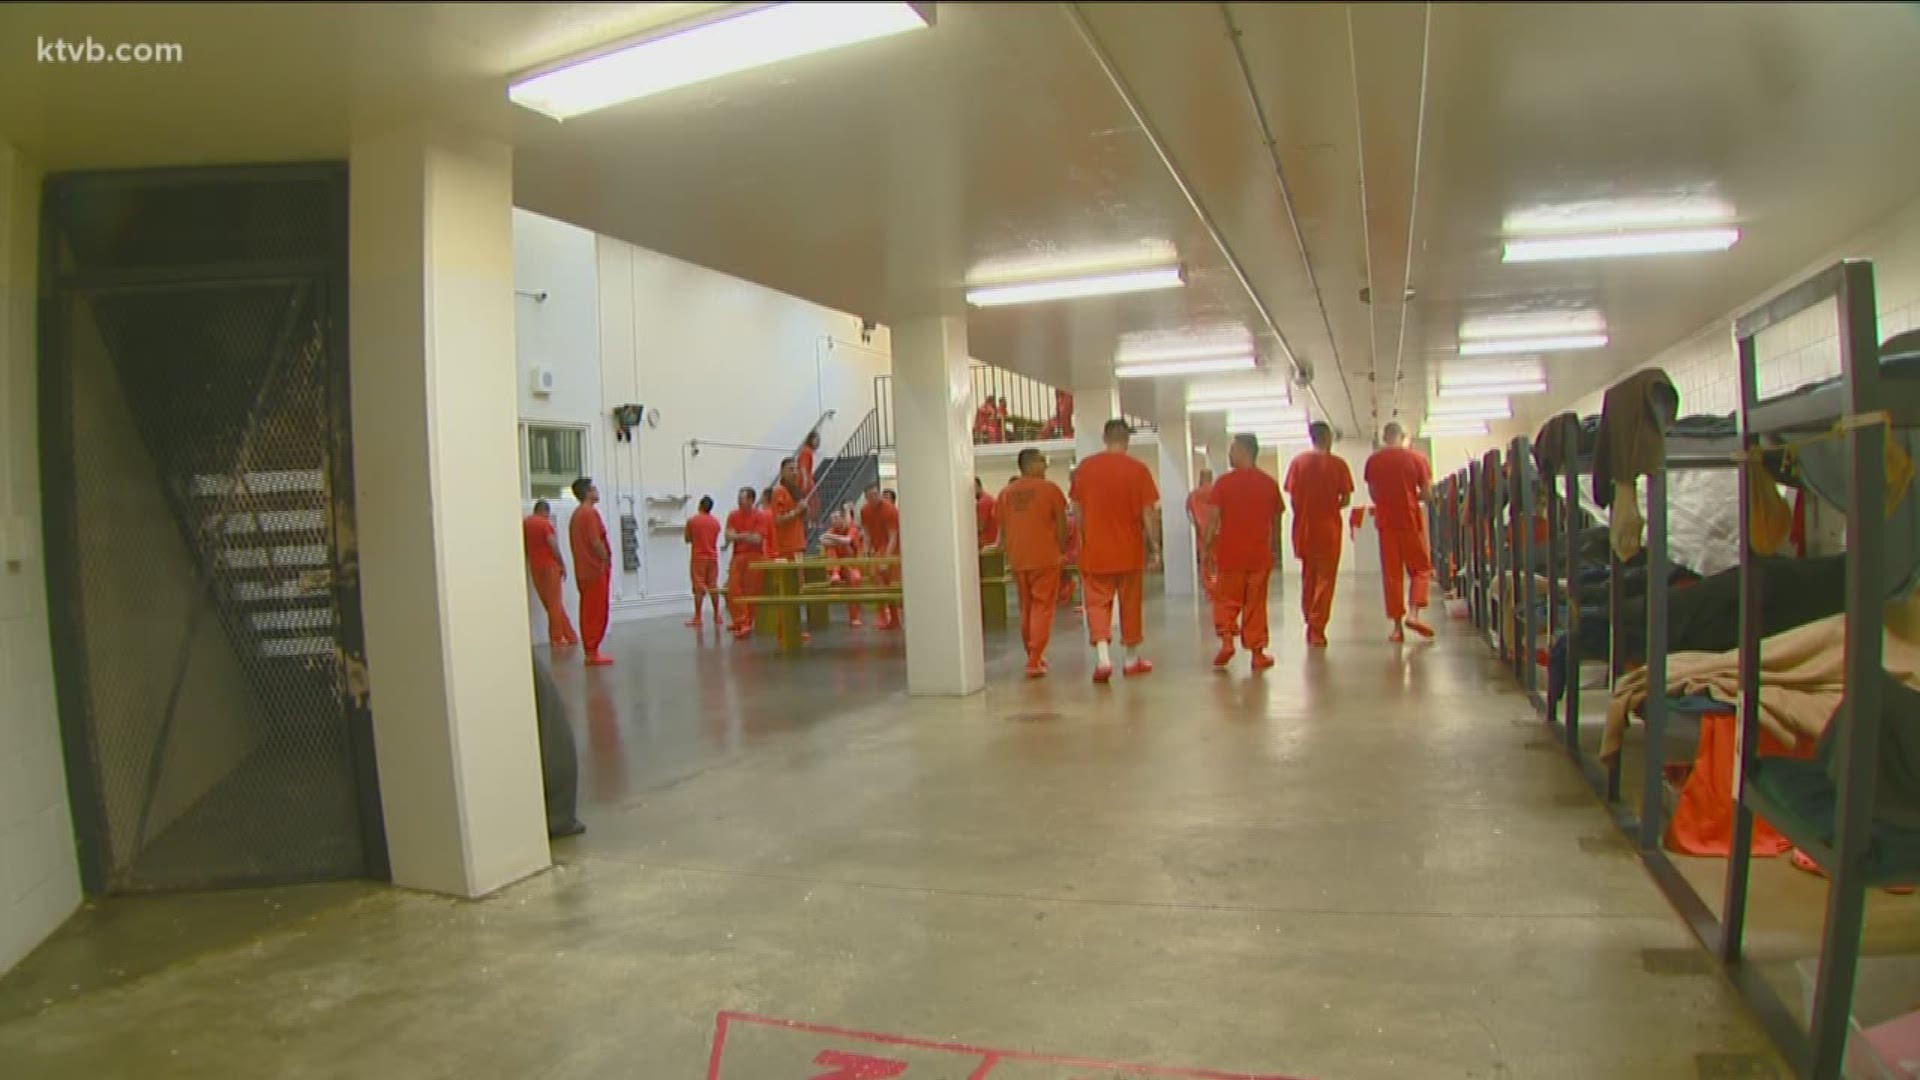 The purpose of the proposed bill is to help Idahoans stay out of prison after serving their sentences.